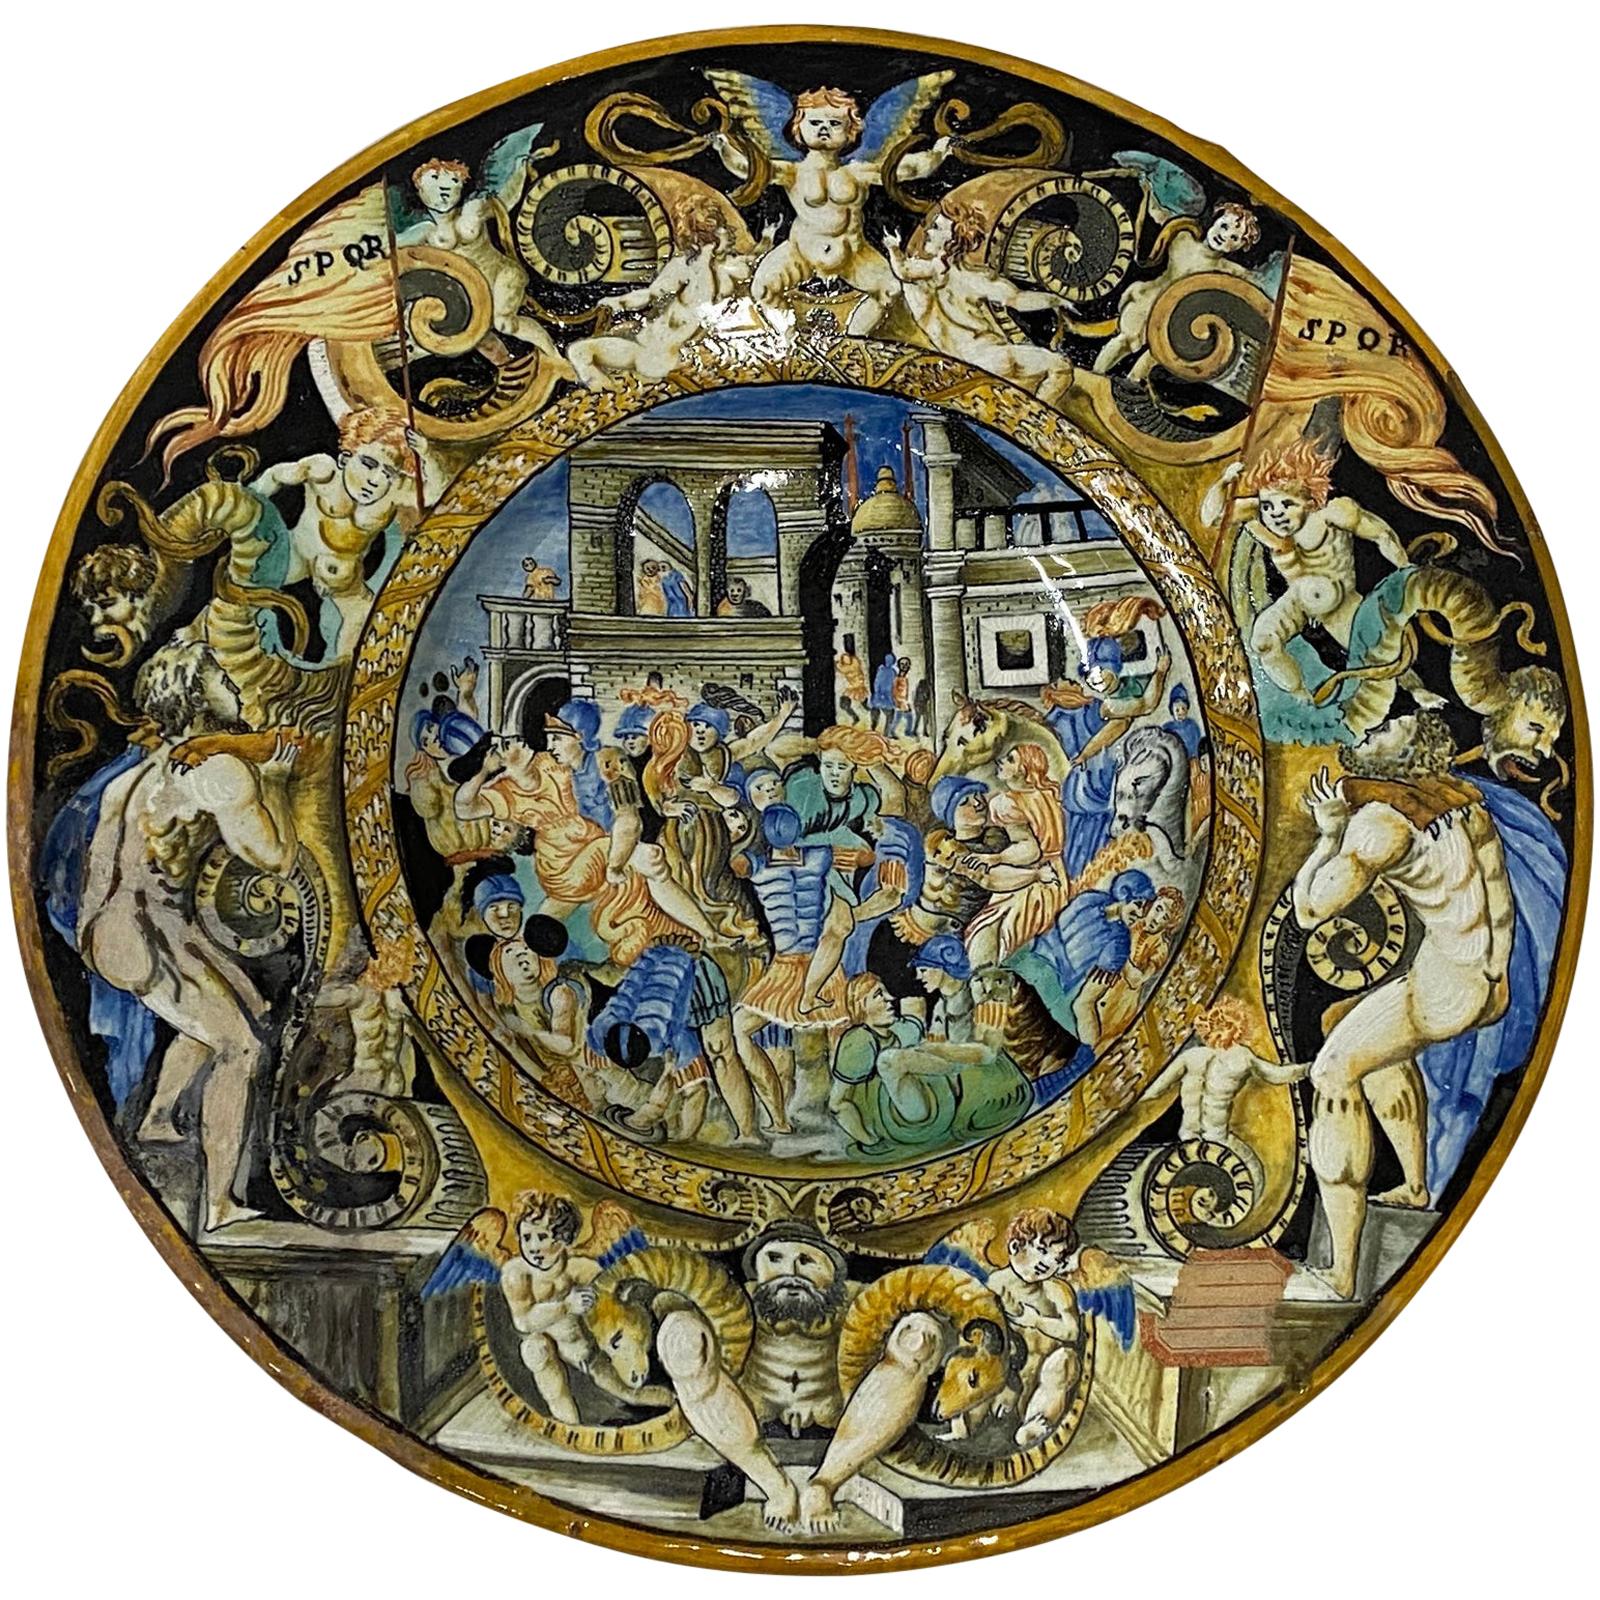 19th century Italian Majolica dish with Renaissance figures

Superb highly decorated Italian Majolica plate with hand a hand painted scene of Roman mythology; The abduction of Sabine women. The border shows Classic Renaissance figures such as